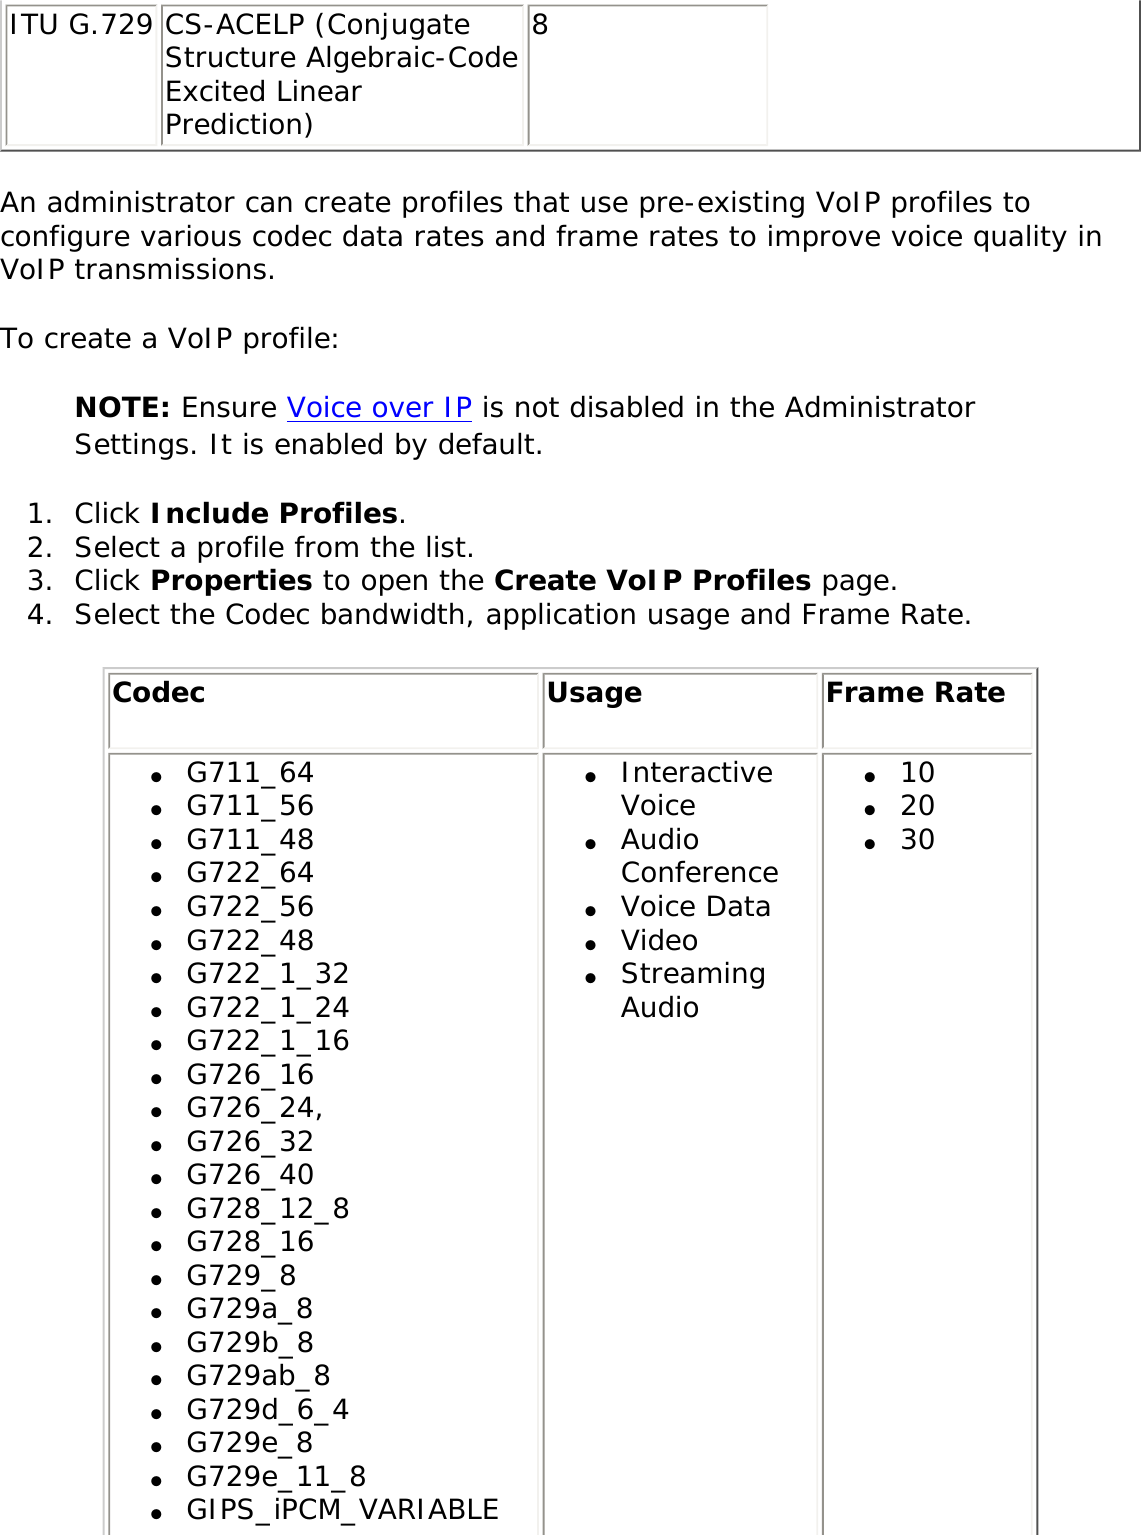 ITU G.729 CS-ACELP (Conjugate Structure Algebraic-Code Excited Linear Prediction) 8 An administrator can create profiles that use pre-existing VoIP profiles to configure various codec data rates and frame rates to improve voice quality in VoIP transmissions. To create a VoIP profile: NOTE: Ensure Voice over IP is not disabled in the Administrator Settings. It is enabled by default. 1.  Click Include Profiles. 2.  Select a profile from the list. 3.  Click Properties to open the Create VoIP Profiles page. 4.  Select the Codec bandwidth, application usage and Frame Rate. Codec  Usage Frame Rate ●     G711_64●     G711_56●     G711_48●     G722_64●     G722_56●     G722_48●     G722_1_32●     G722_1_24●     G722_1_16●     G726_16●     G726_24,●     G726_32●     G726_40●     G728_12_8●     G728_16●     G729_8●     G729a_8●     G729b_8●     G729ab_8●     G729d_6_4●     G729e_8●     G729e_11_8●     GIPS_iPCM_VARIABLE●     Interactive Voice ●     Audio Conference●     Voice Data●     Video●     Streaming Audio ●     10●     20●     30